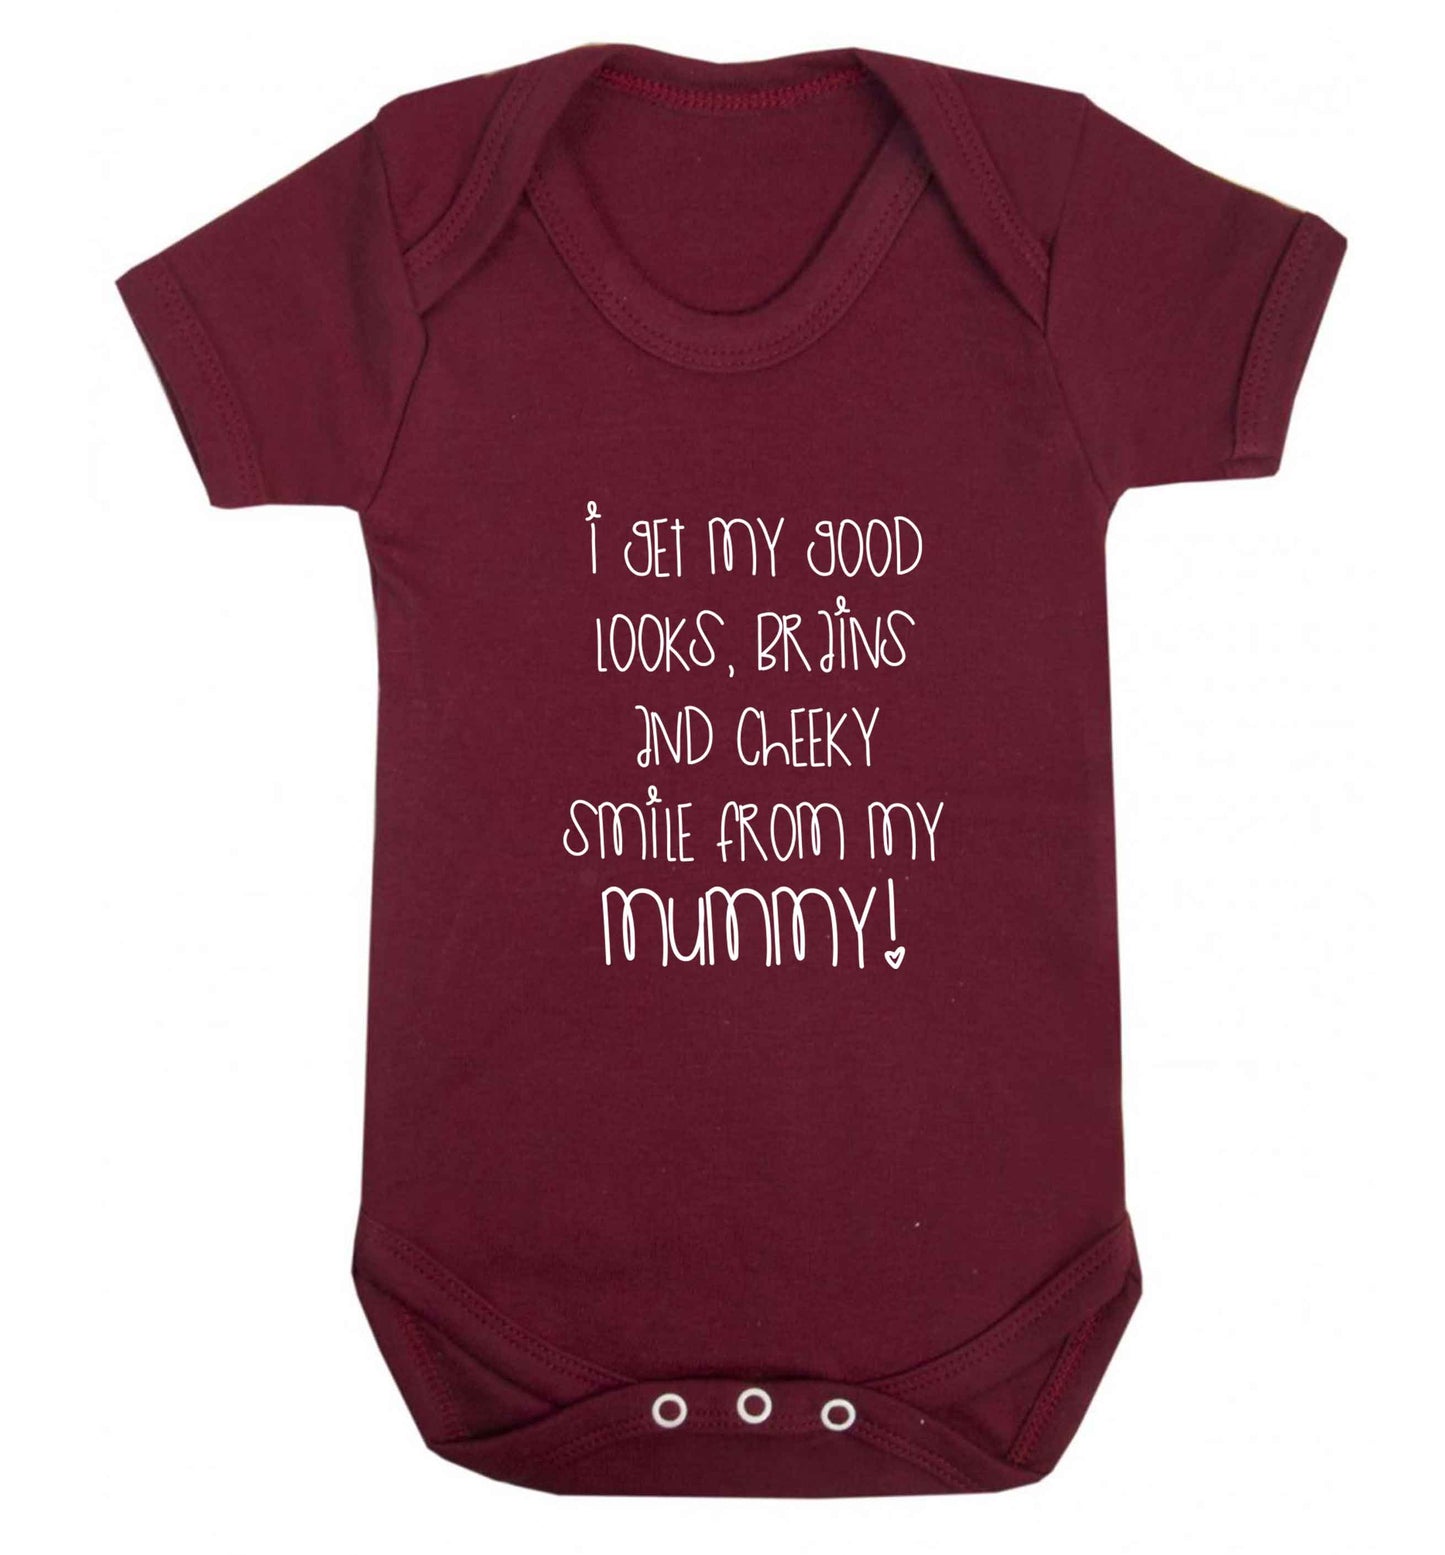 I get my good looks, brains and cheeky smile from my mummy baby vest maroon 18-24 months